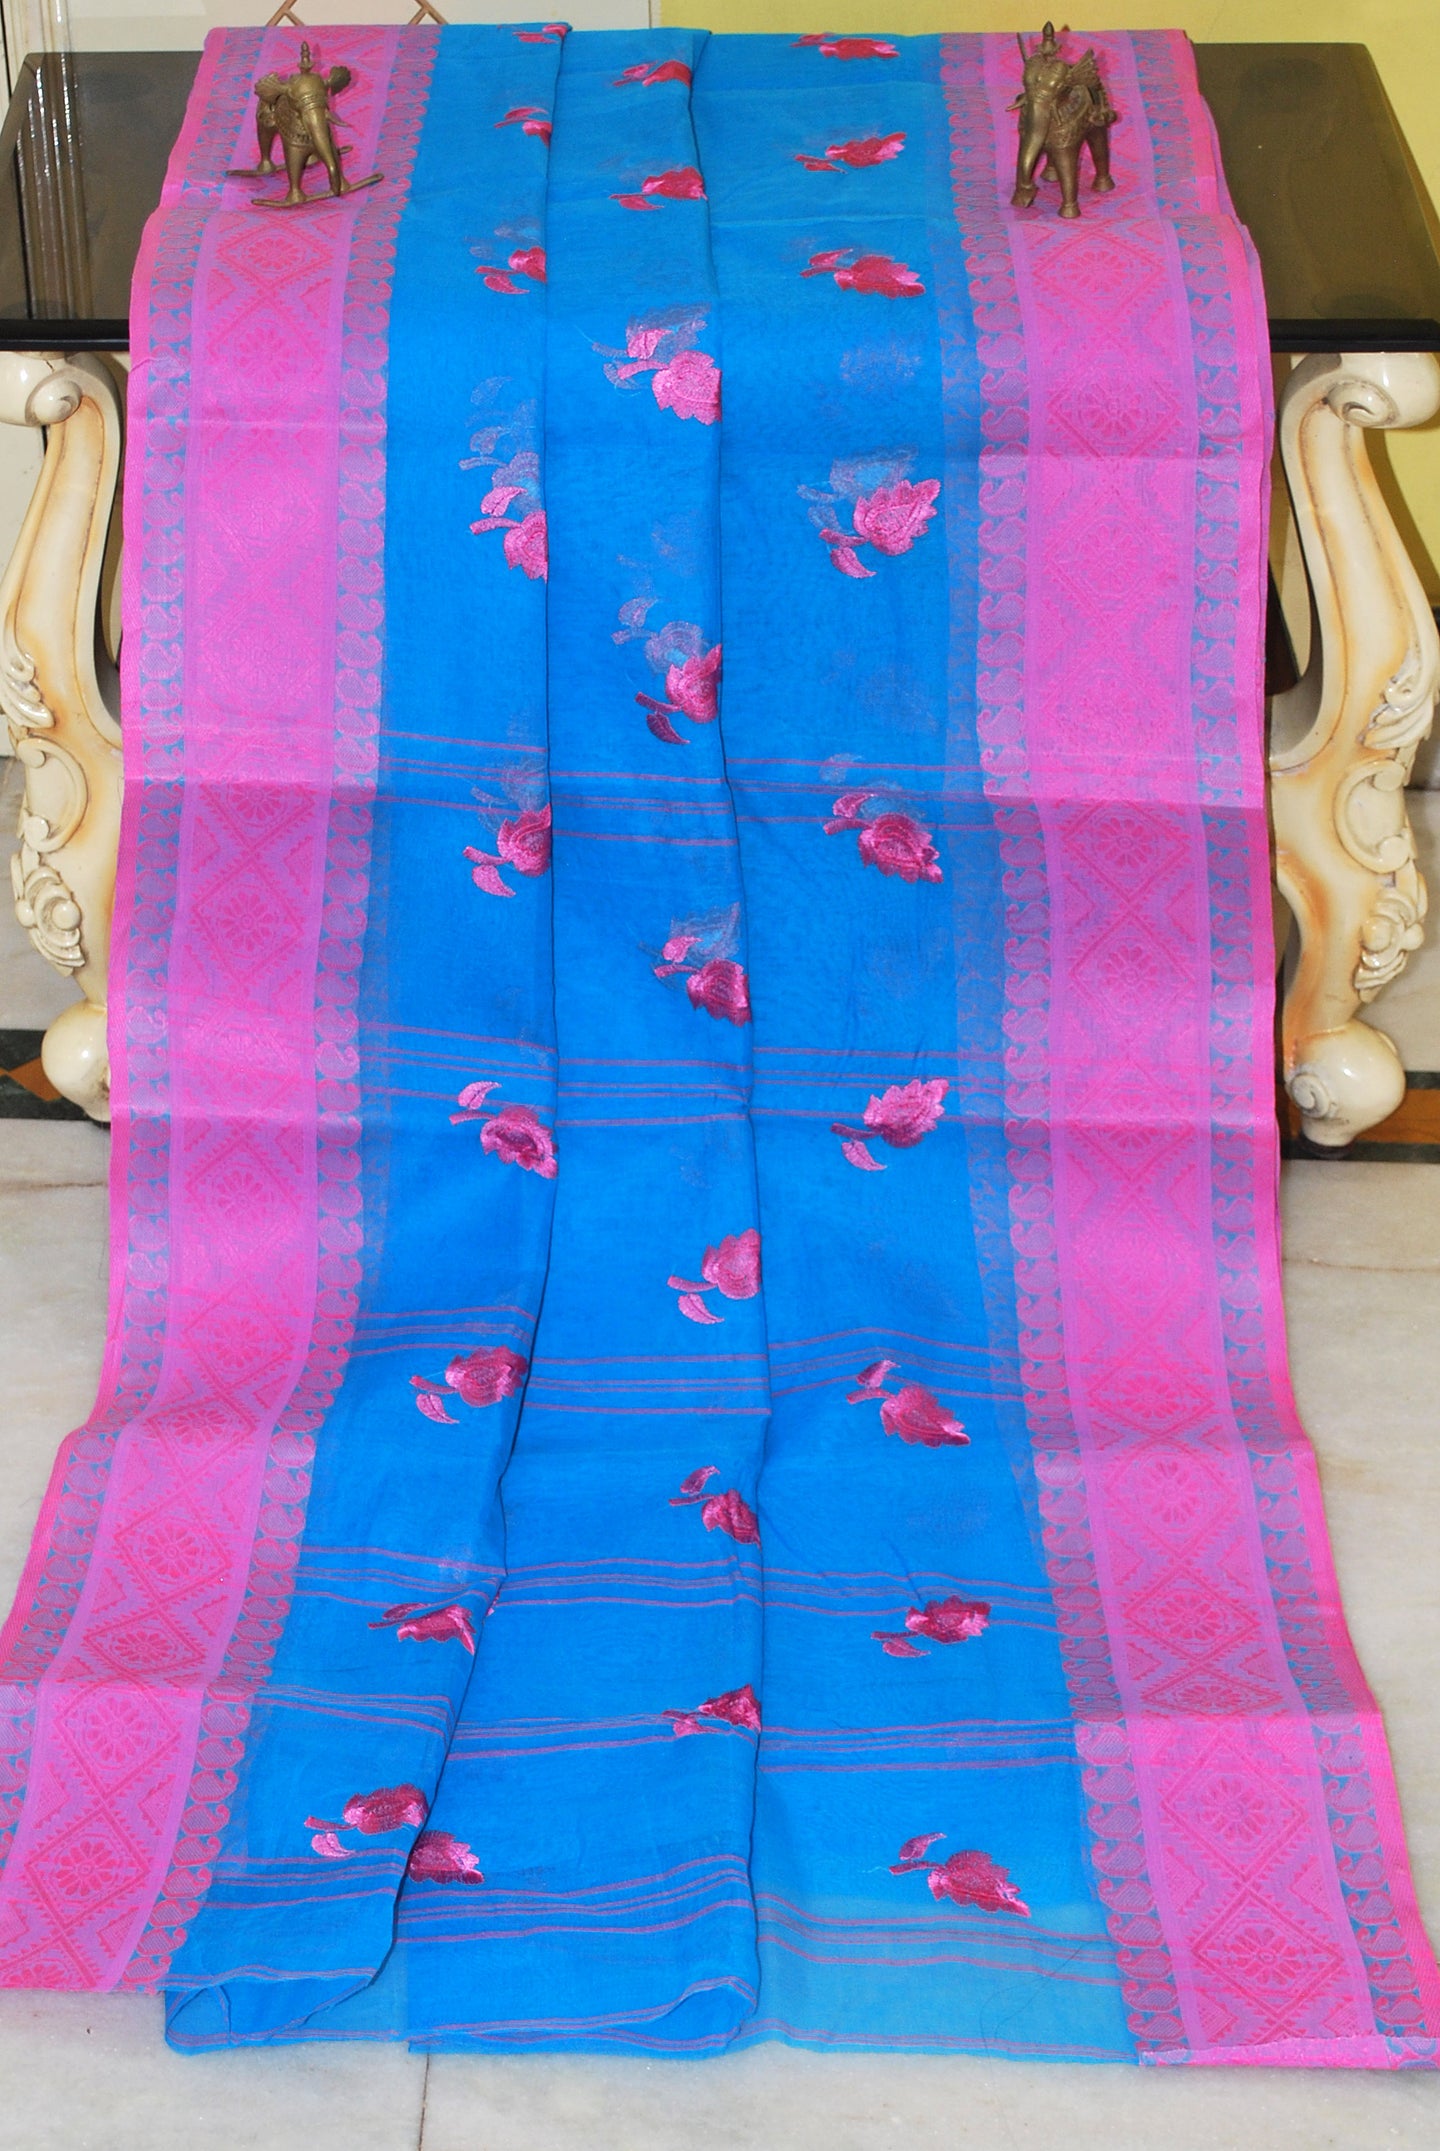 Bengal Handloom Cotton Saree with Leaf Motif Embroidery Work in Dodger Blue and Pink